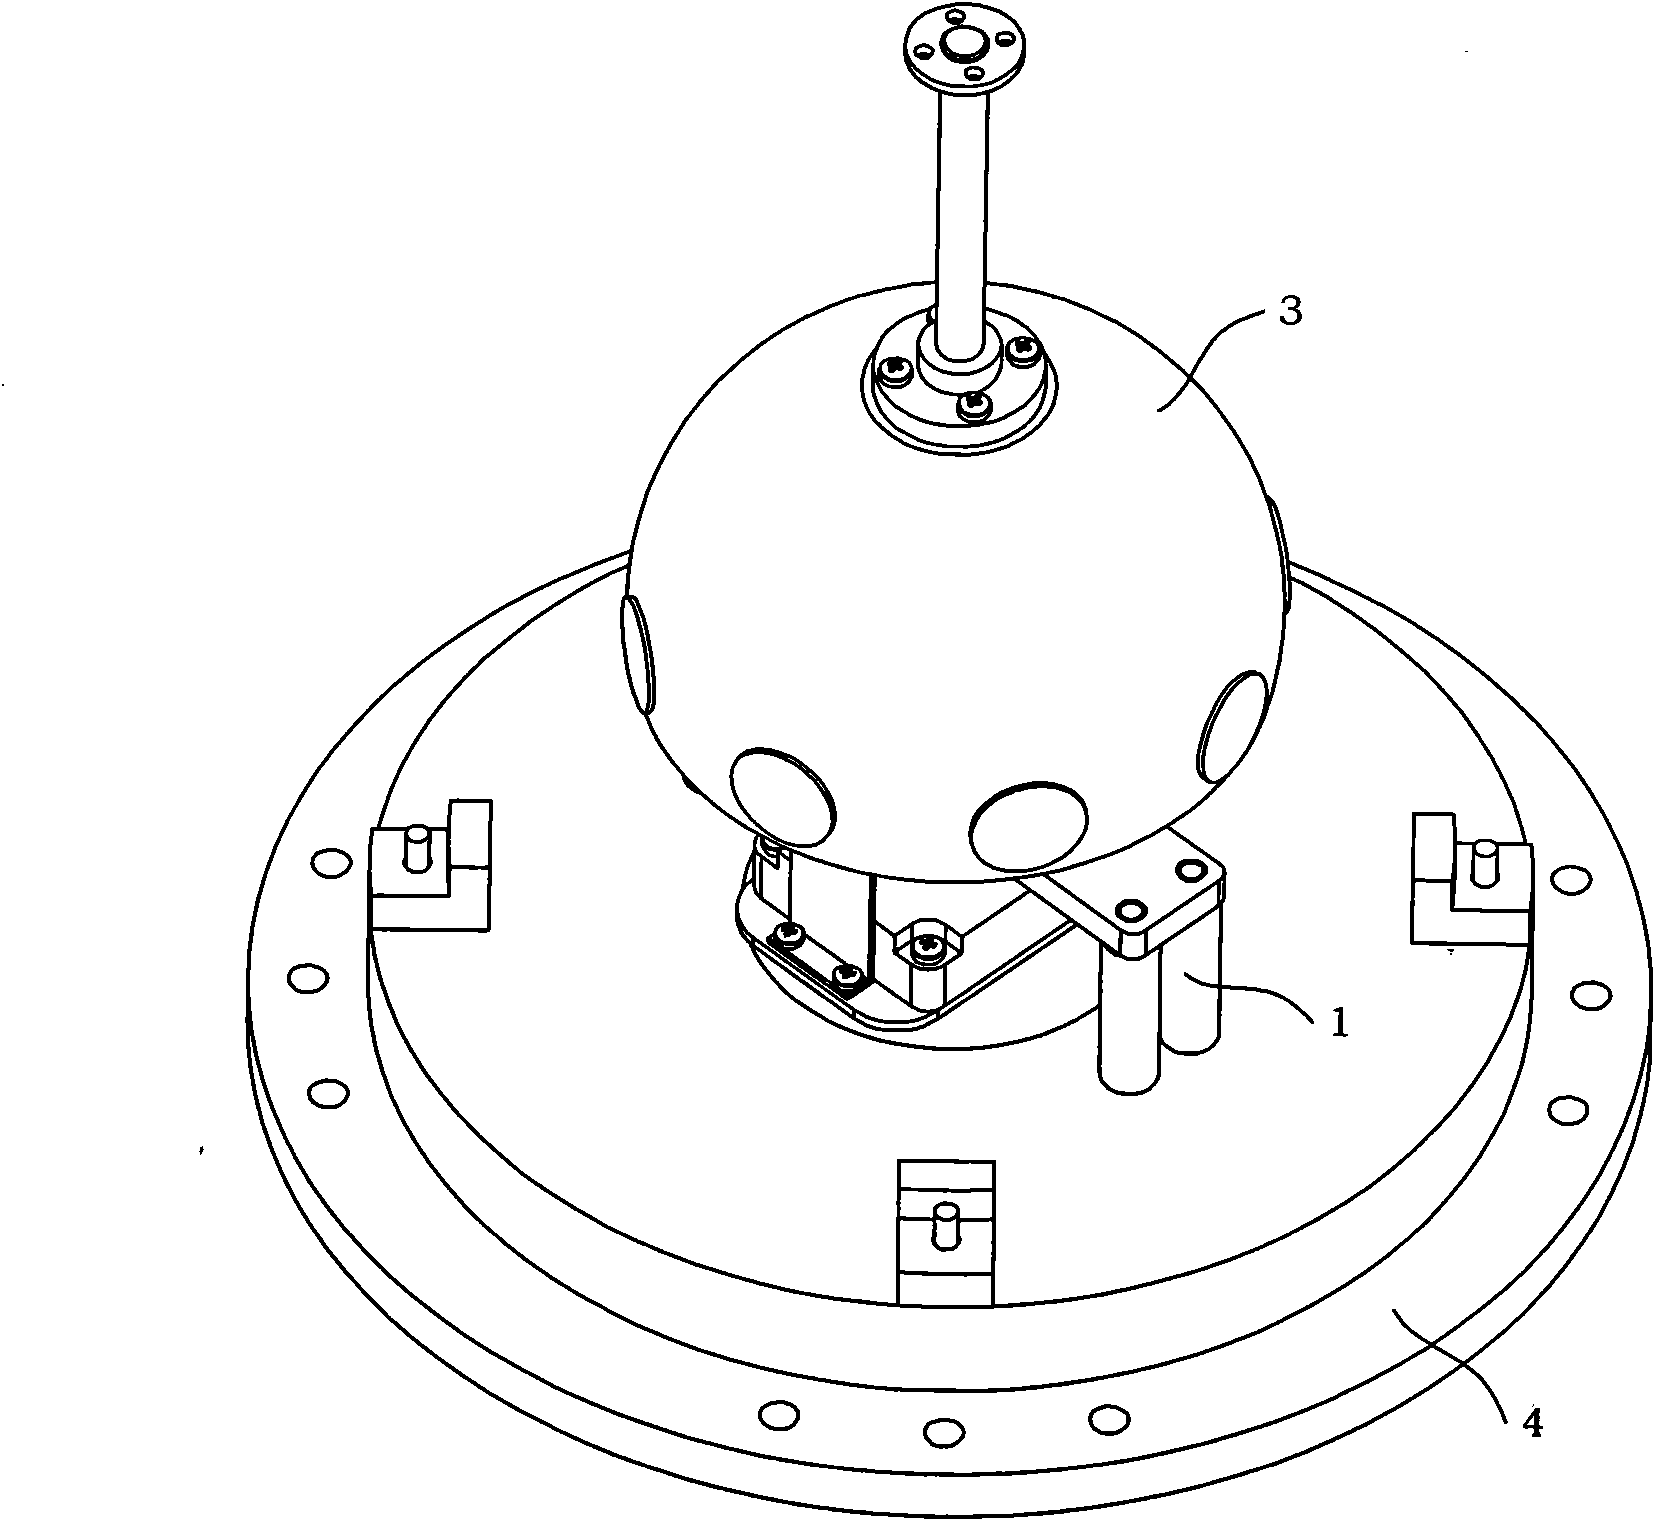 TDOF (Three Degrees of Freedom) passive ball joint with attitude detection and applicable to ball motor